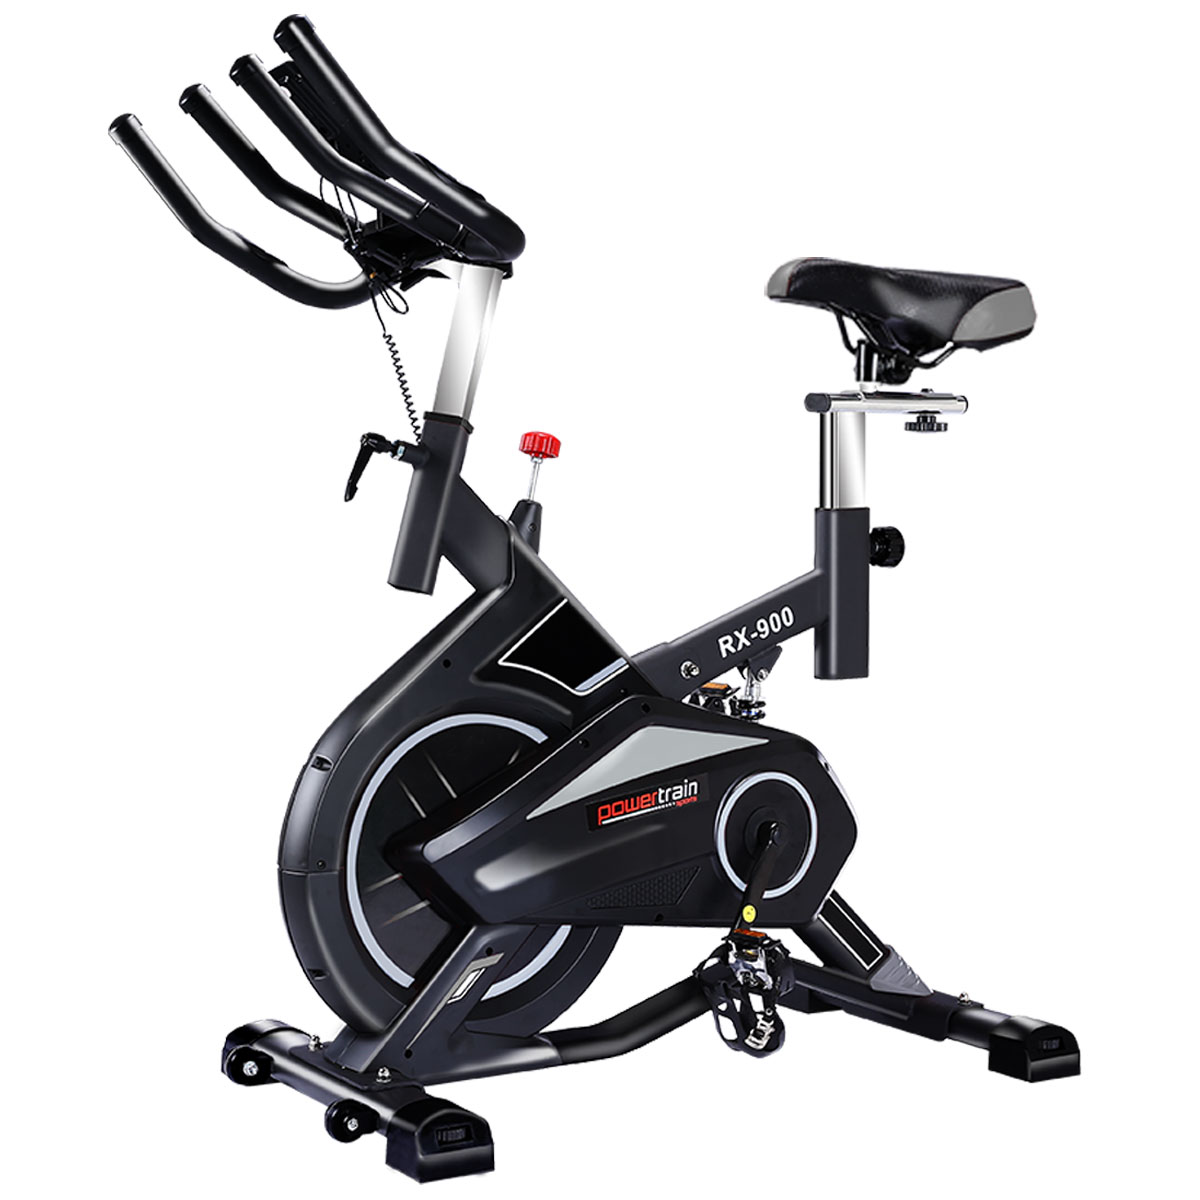 PowerTrain RX-900 Exercise Spin Bike Cardio Cycle - Silver